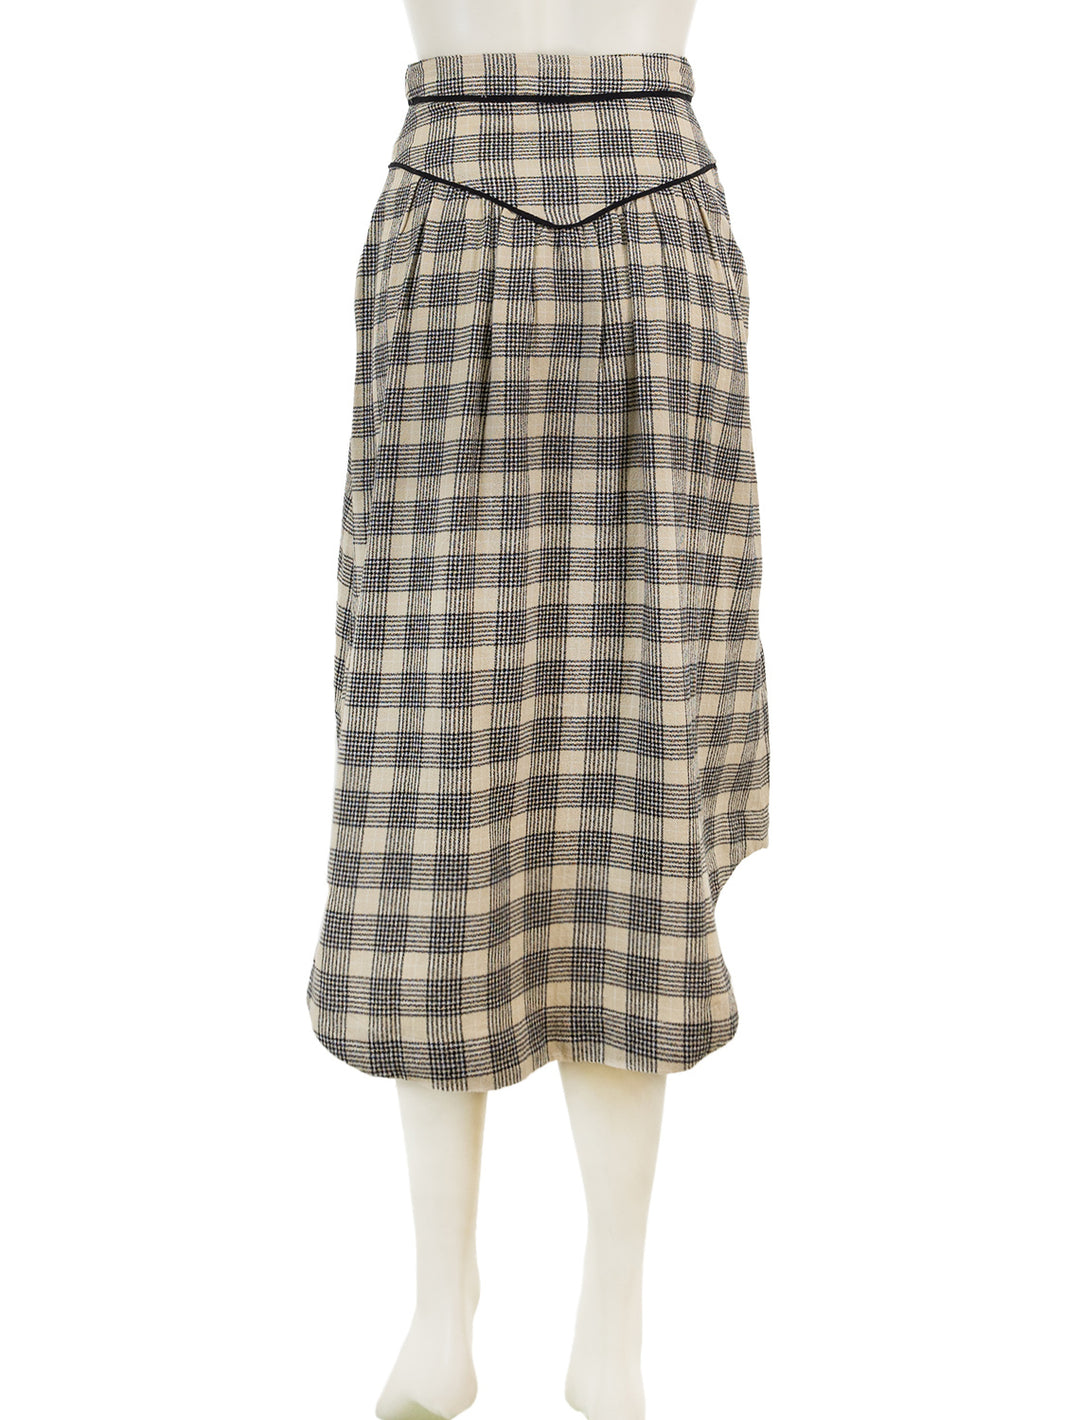 Back view of Mother Denim's the out skirts in black and cream plaid.